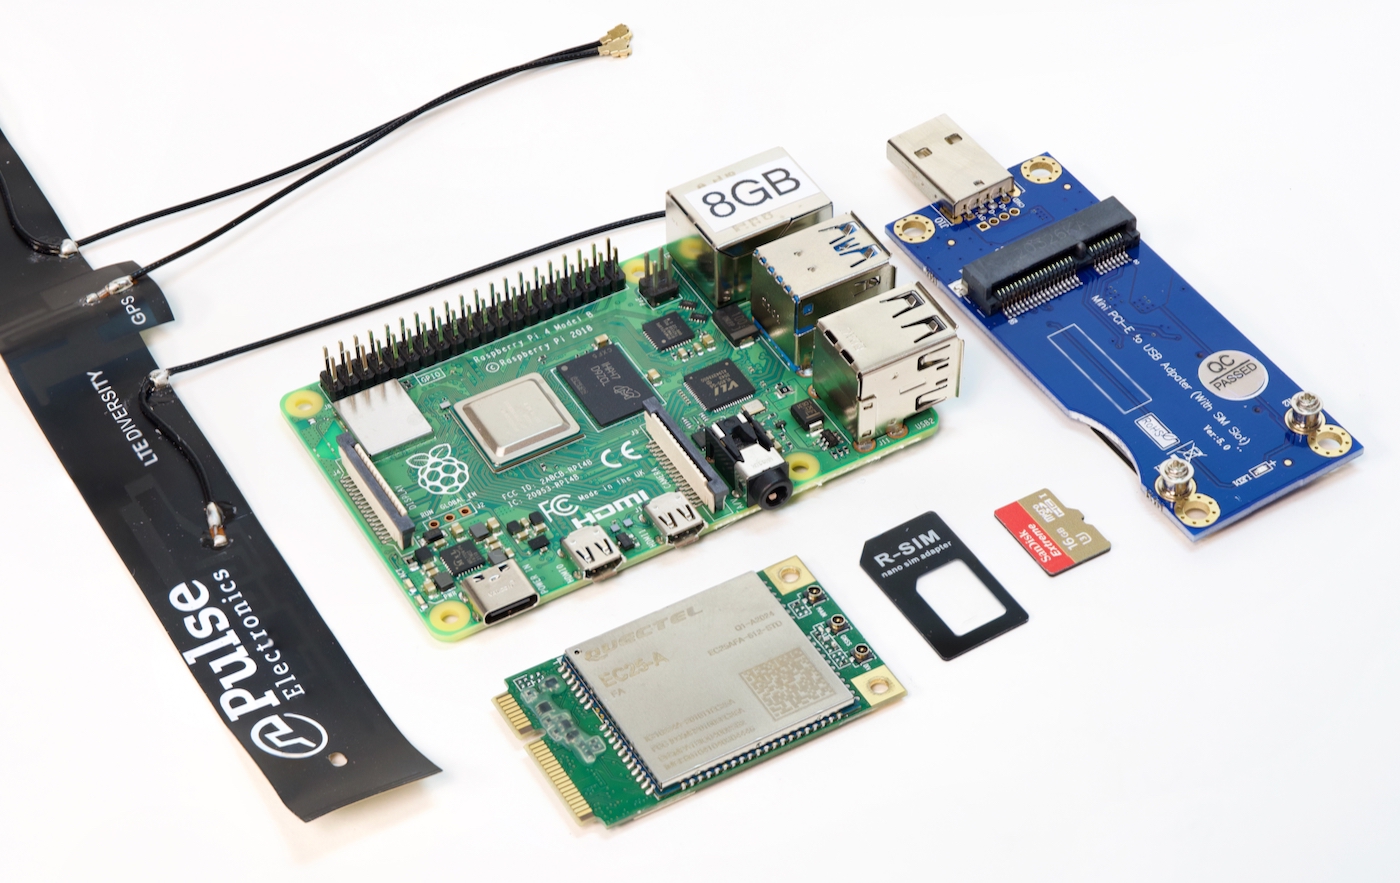 Raspberry Pi 4 model B with 4G LTE wireless Quectel modem and antenna and USB adapter